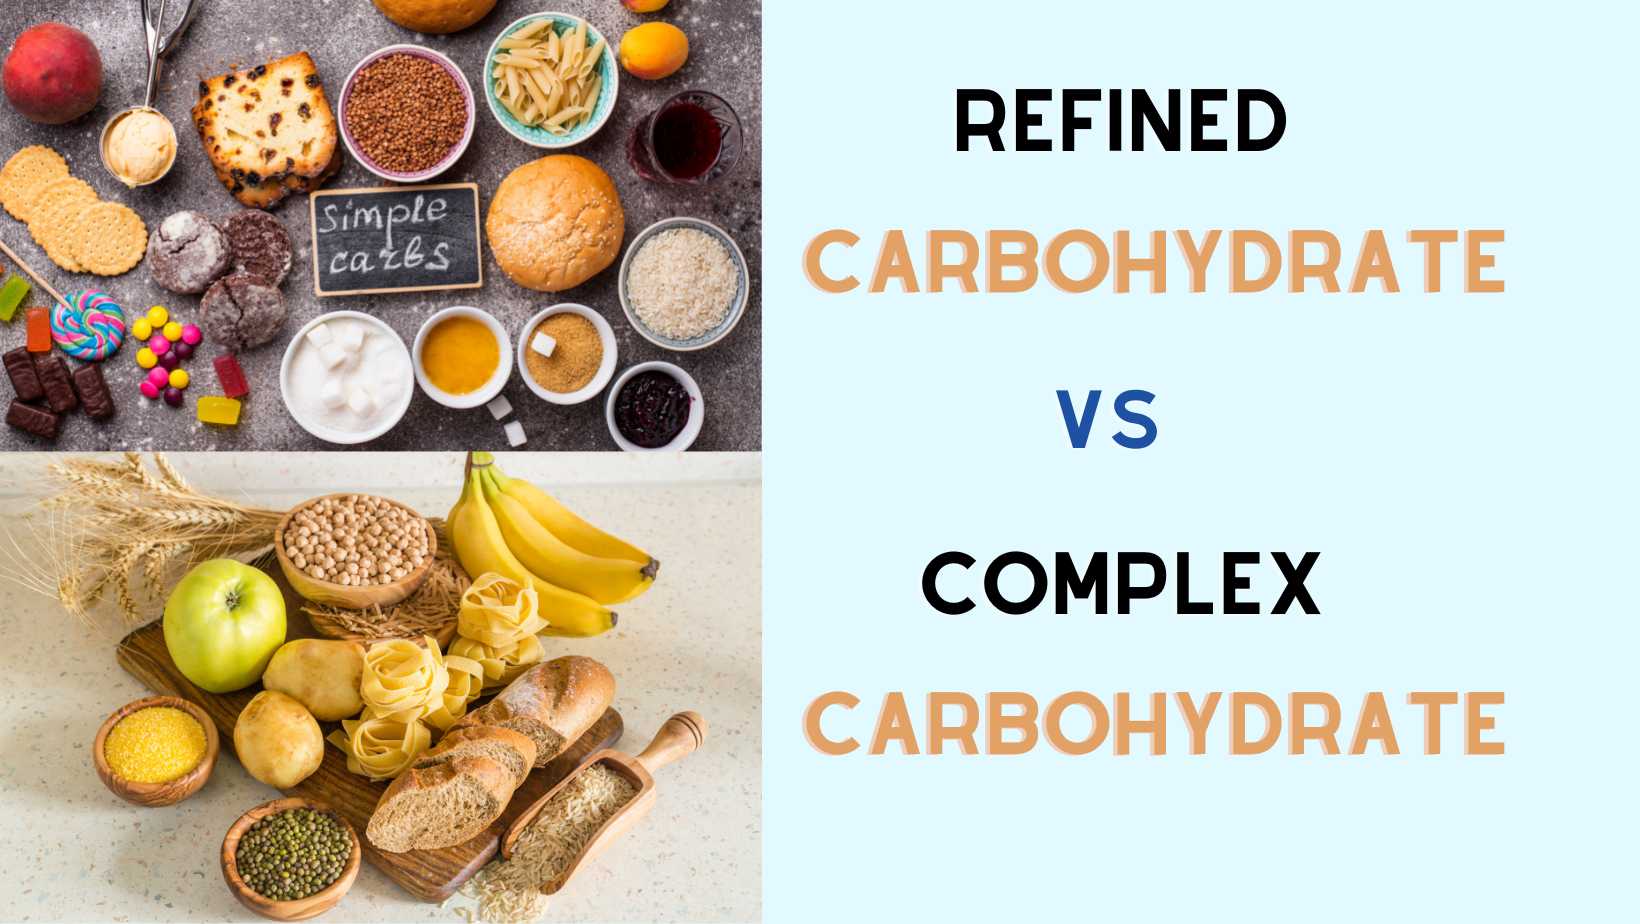 simple carbohydrates foods